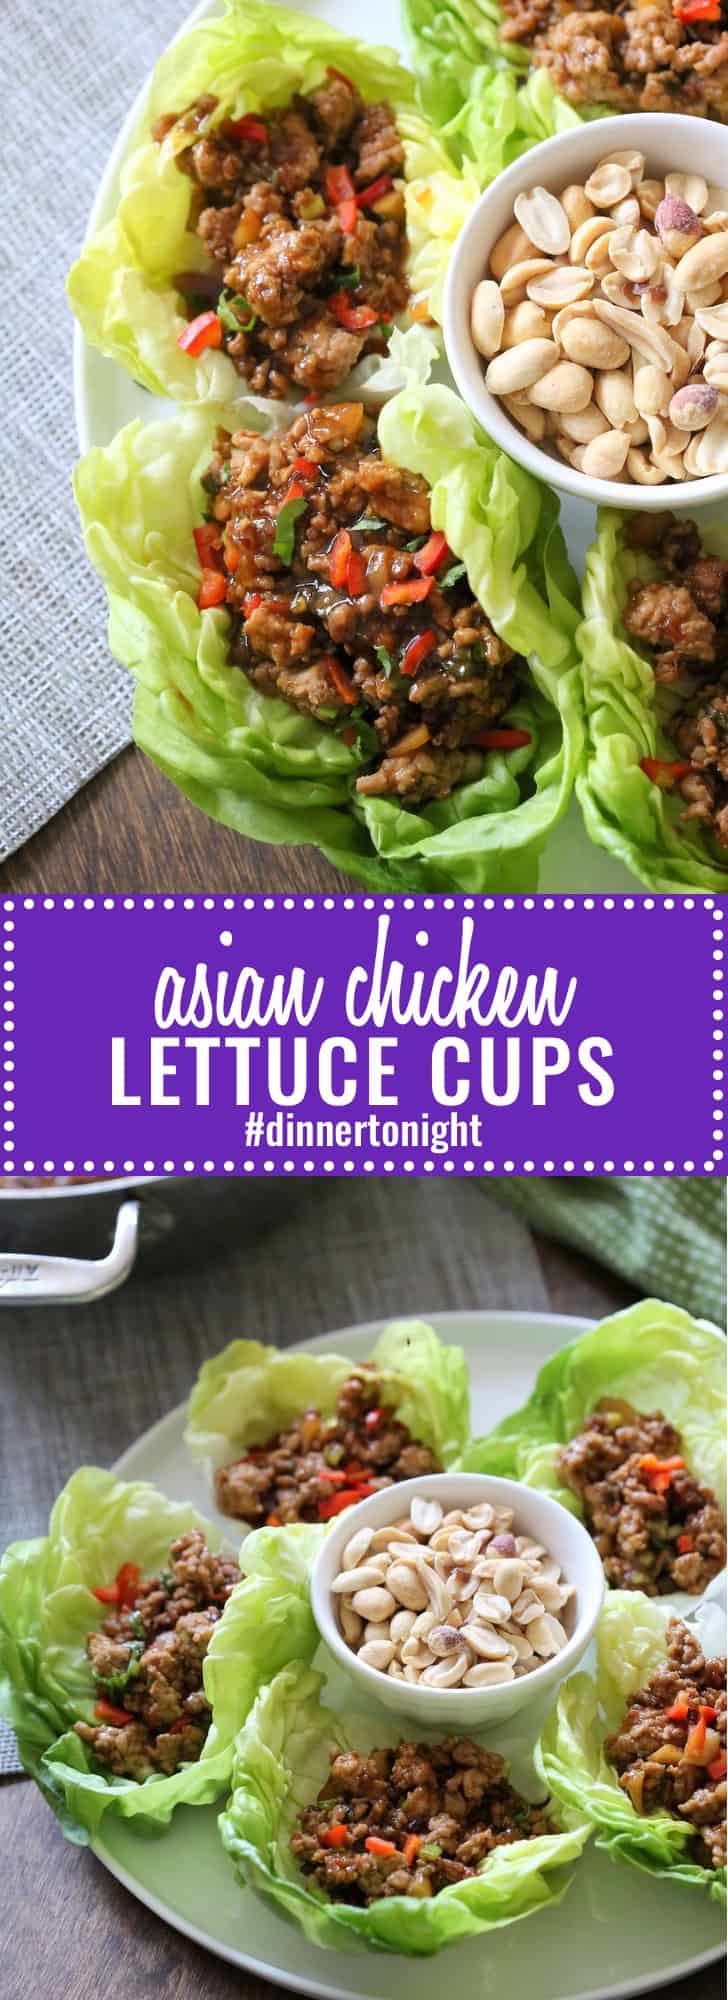 Asian Chicken Lettuce Cups- Super saucy chicken and vegetables in a tangy sweet sauce. Make ahead. Done in less than 30 minutes! #dinnertonight #lettucewraps